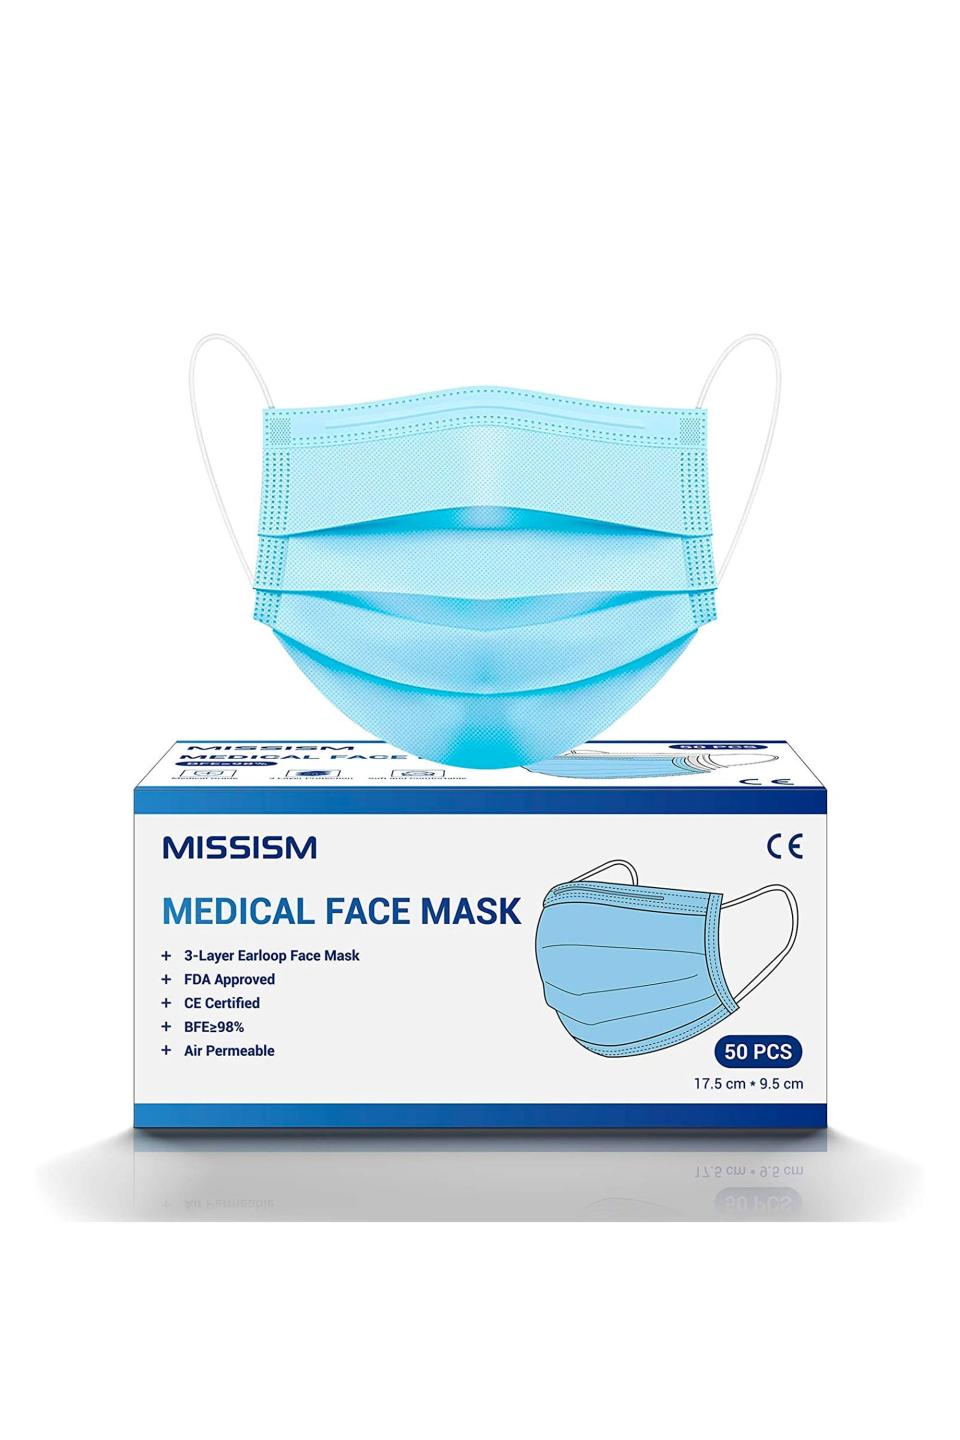 3) Disposable Medical-Grade Face Mask (Pack of 50)